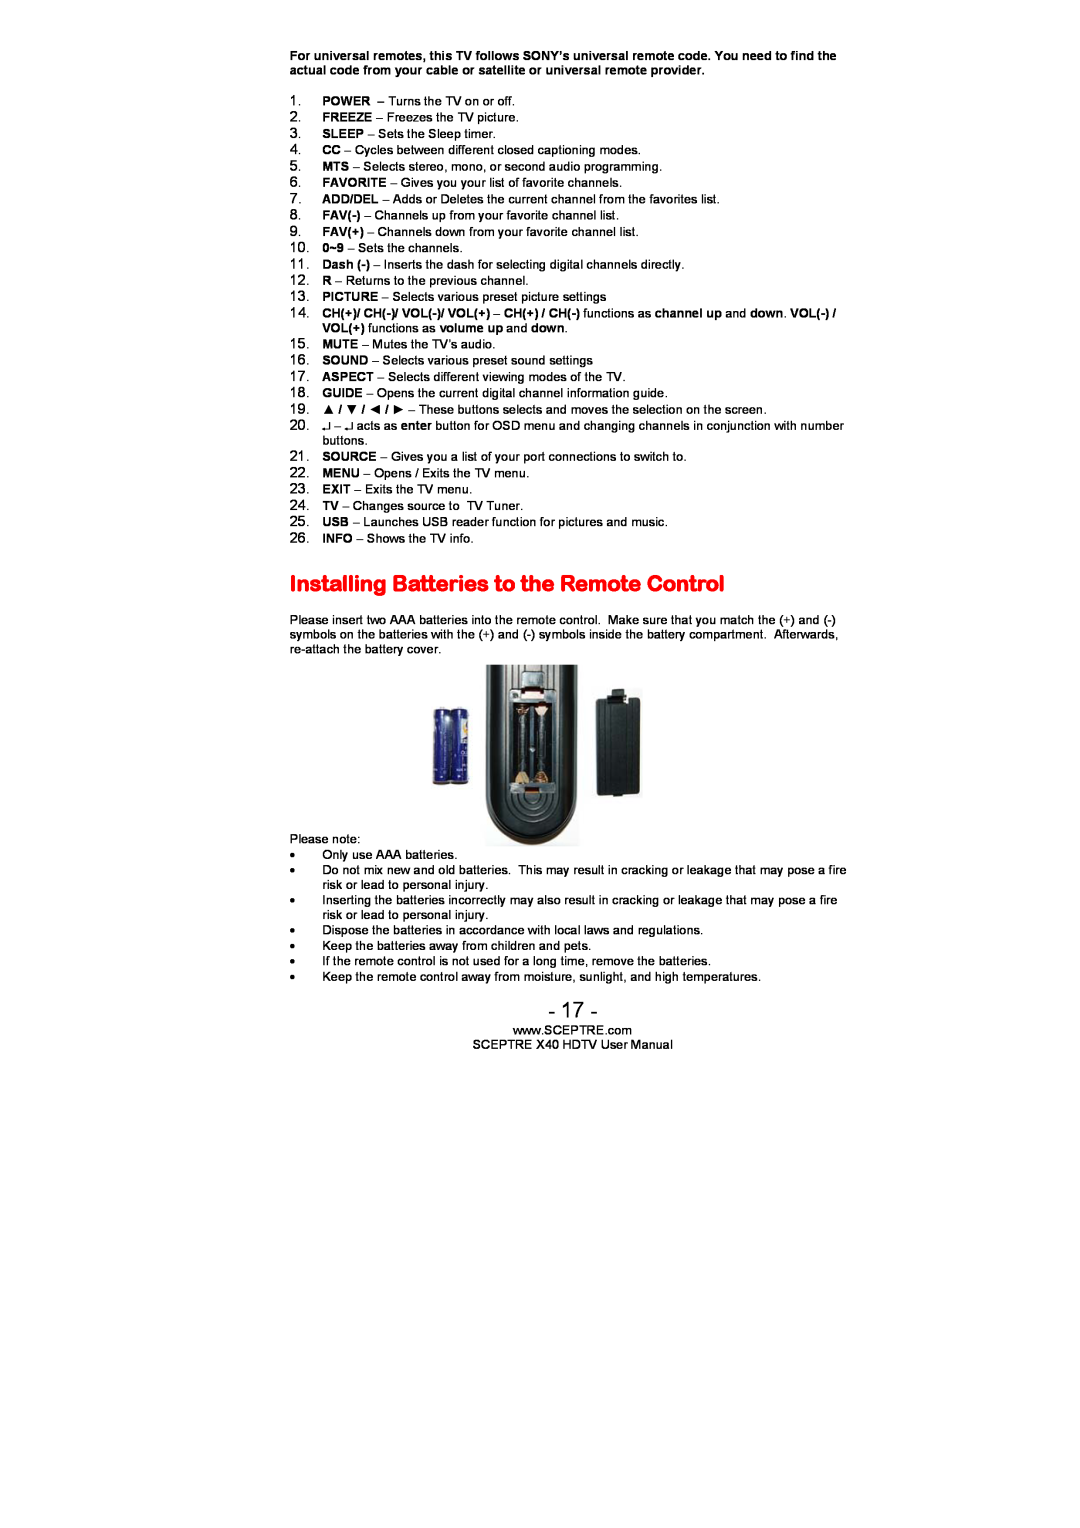 Sceptre Technologies SCEPTRE X40 HDTV user manual Installing Batteries to the Remote Control 